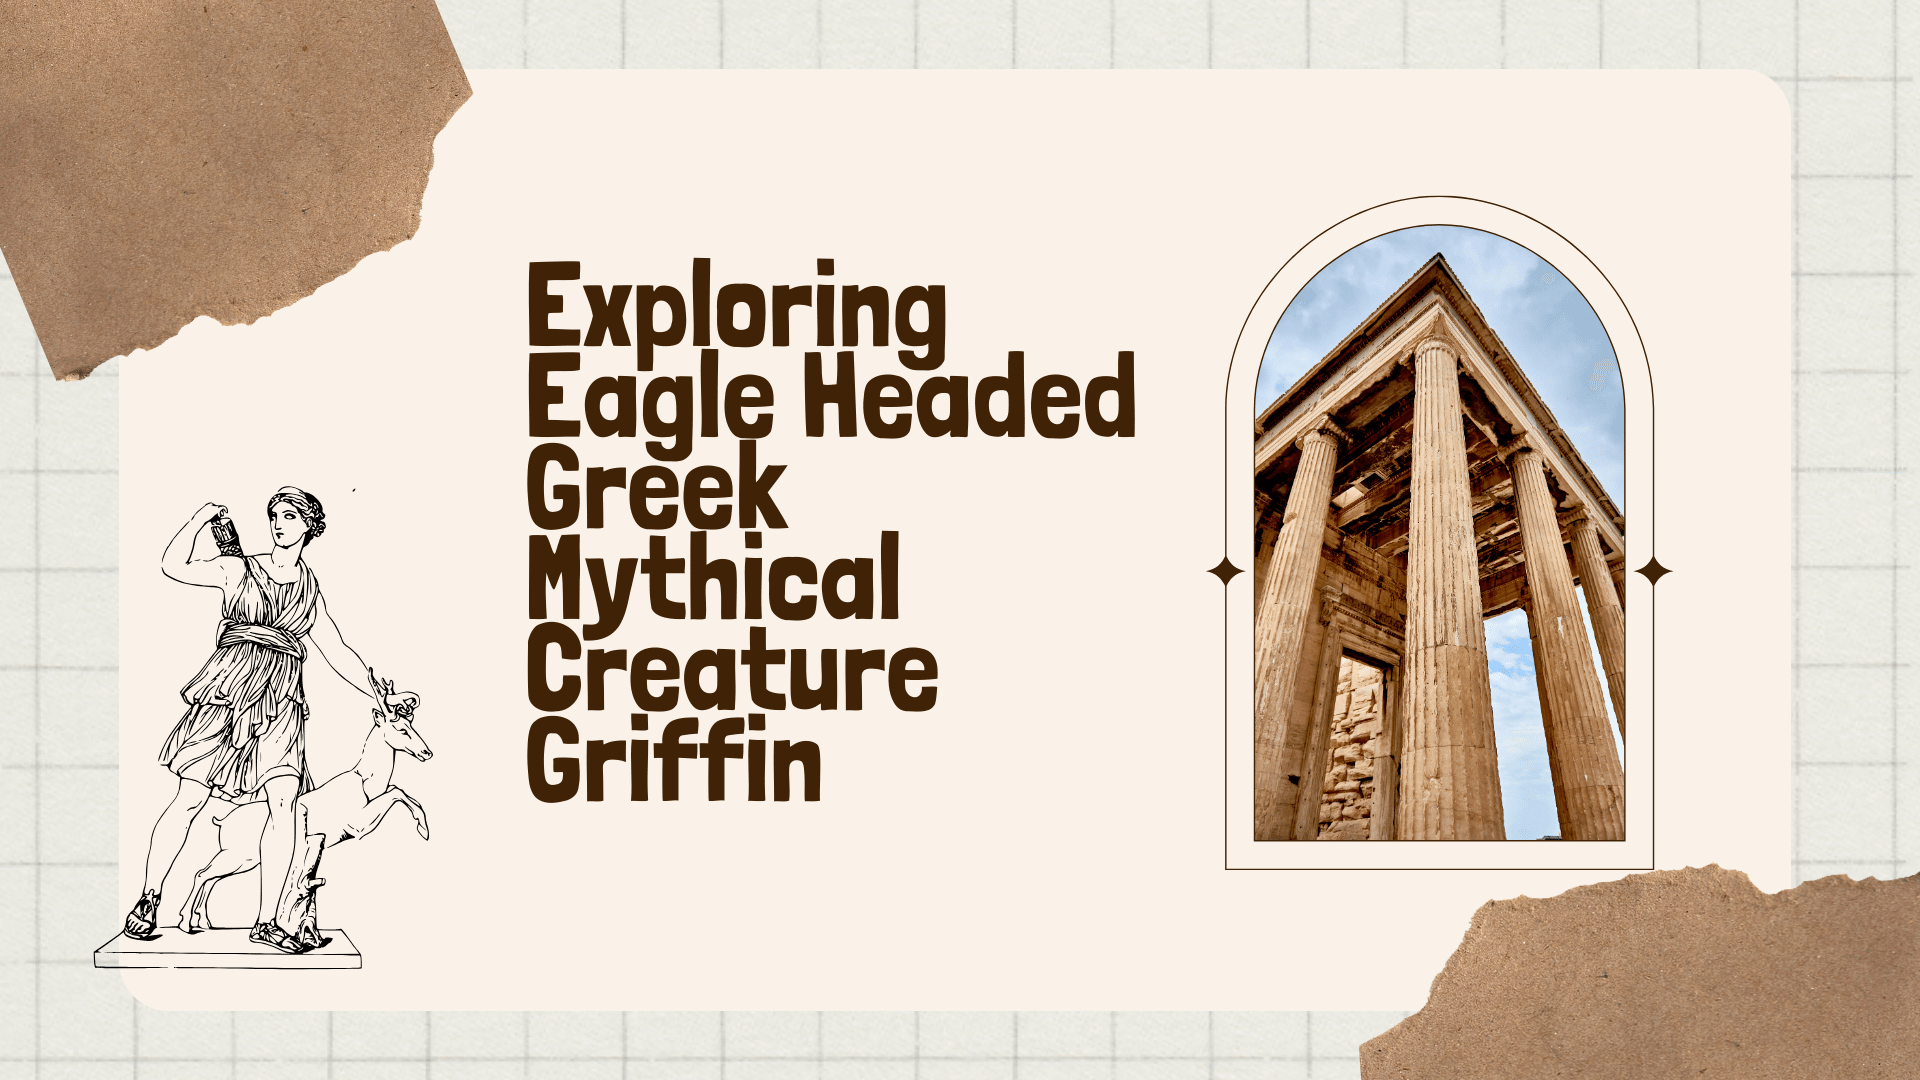 Exploring Eagle Headed Greek Mythical Creature Griffin